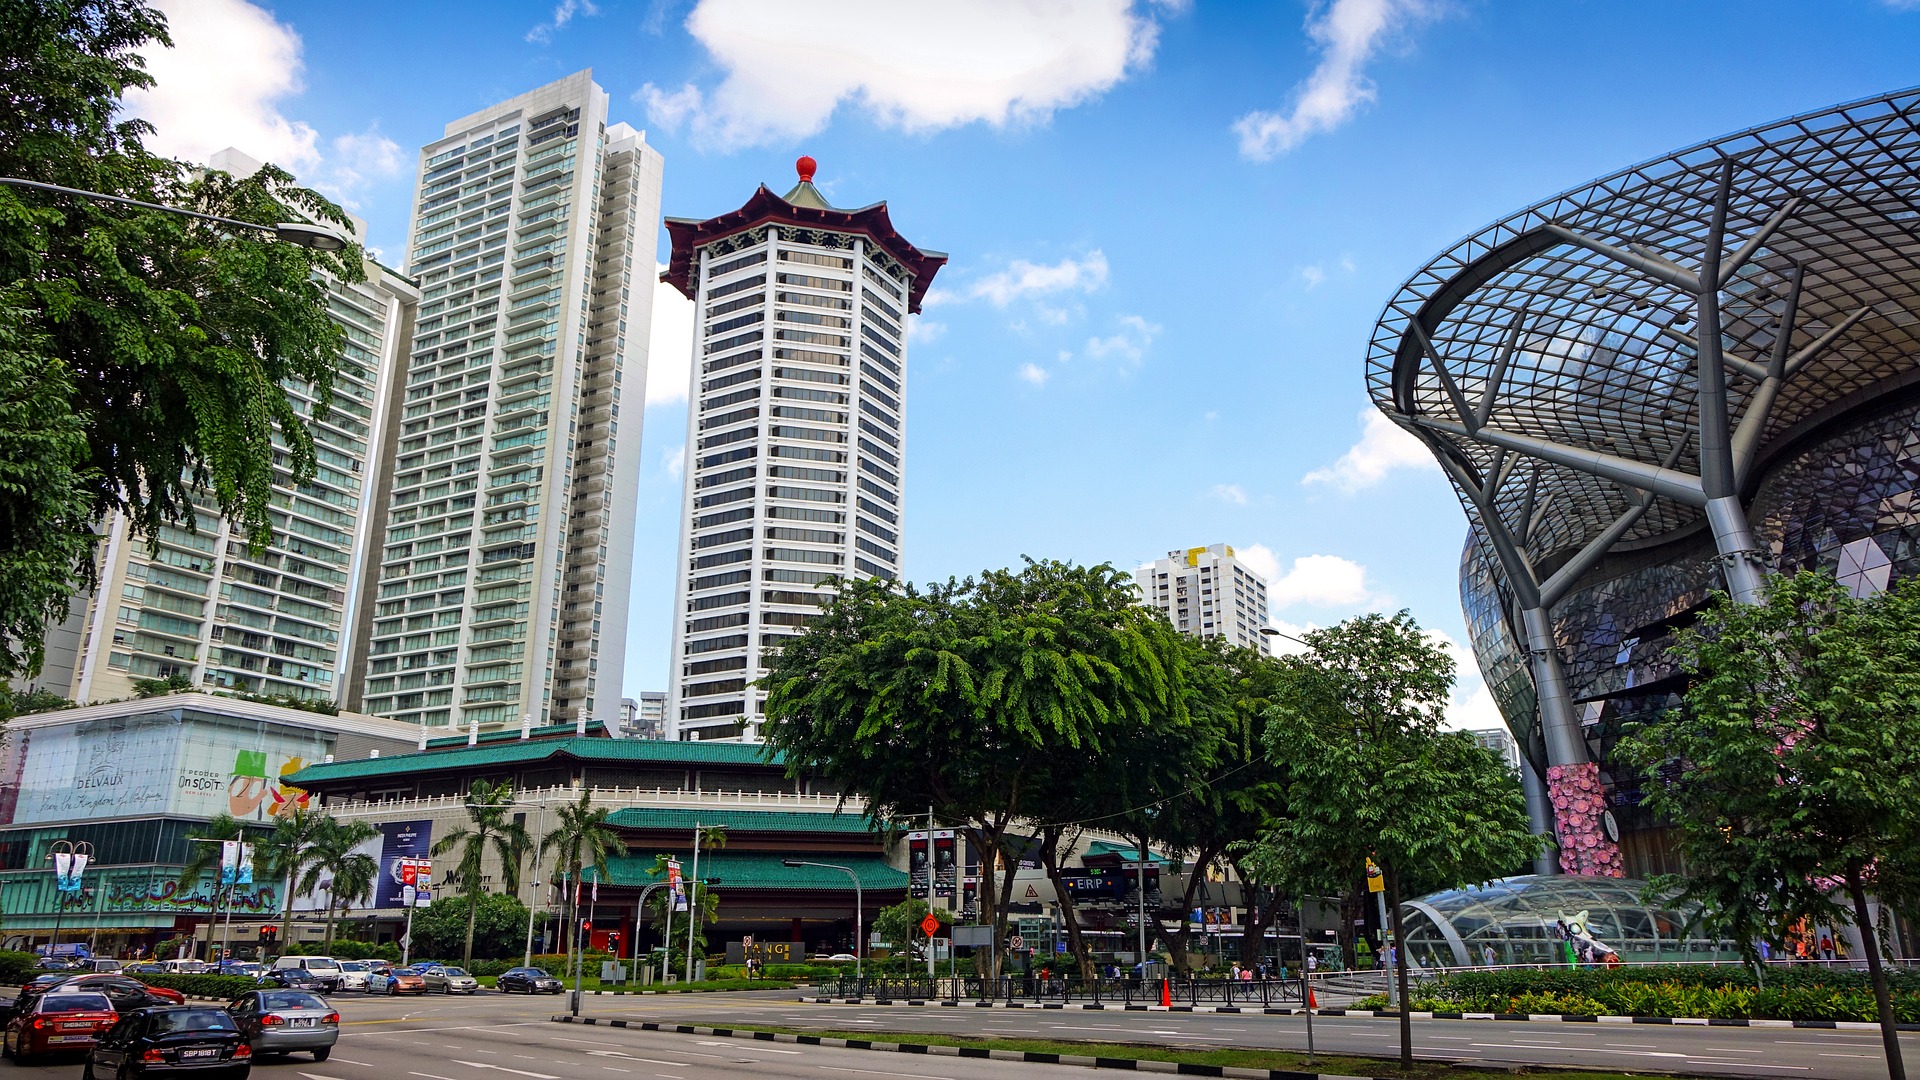 orchard road in singapore with shops and skyscrapers